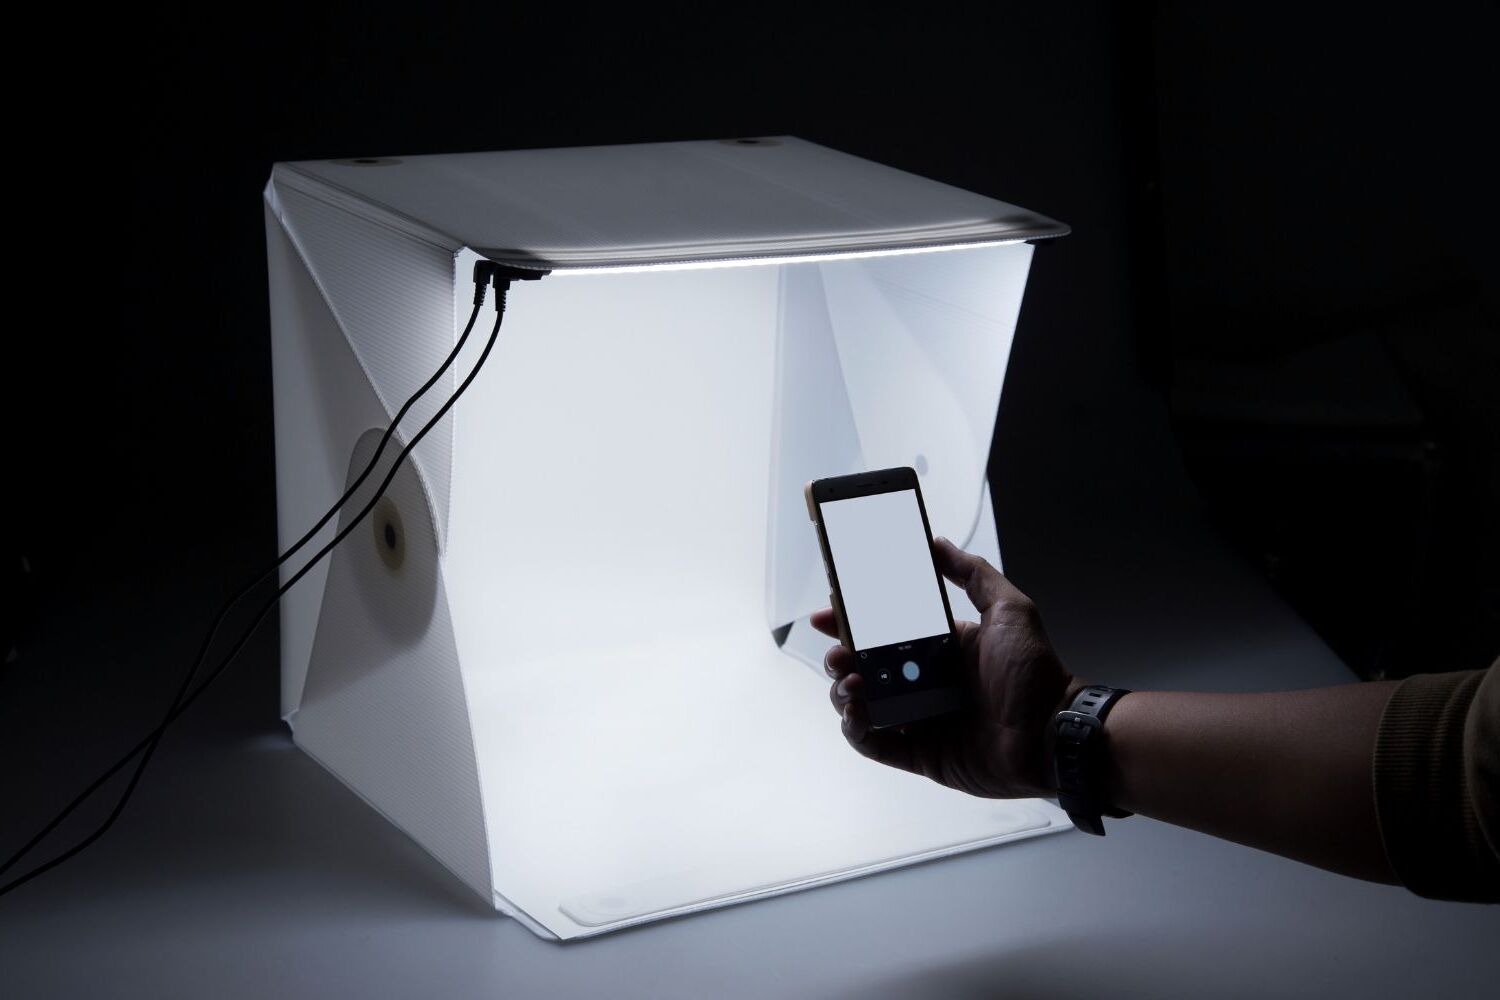 Light Box Review: A Must-Have Accessory for Her